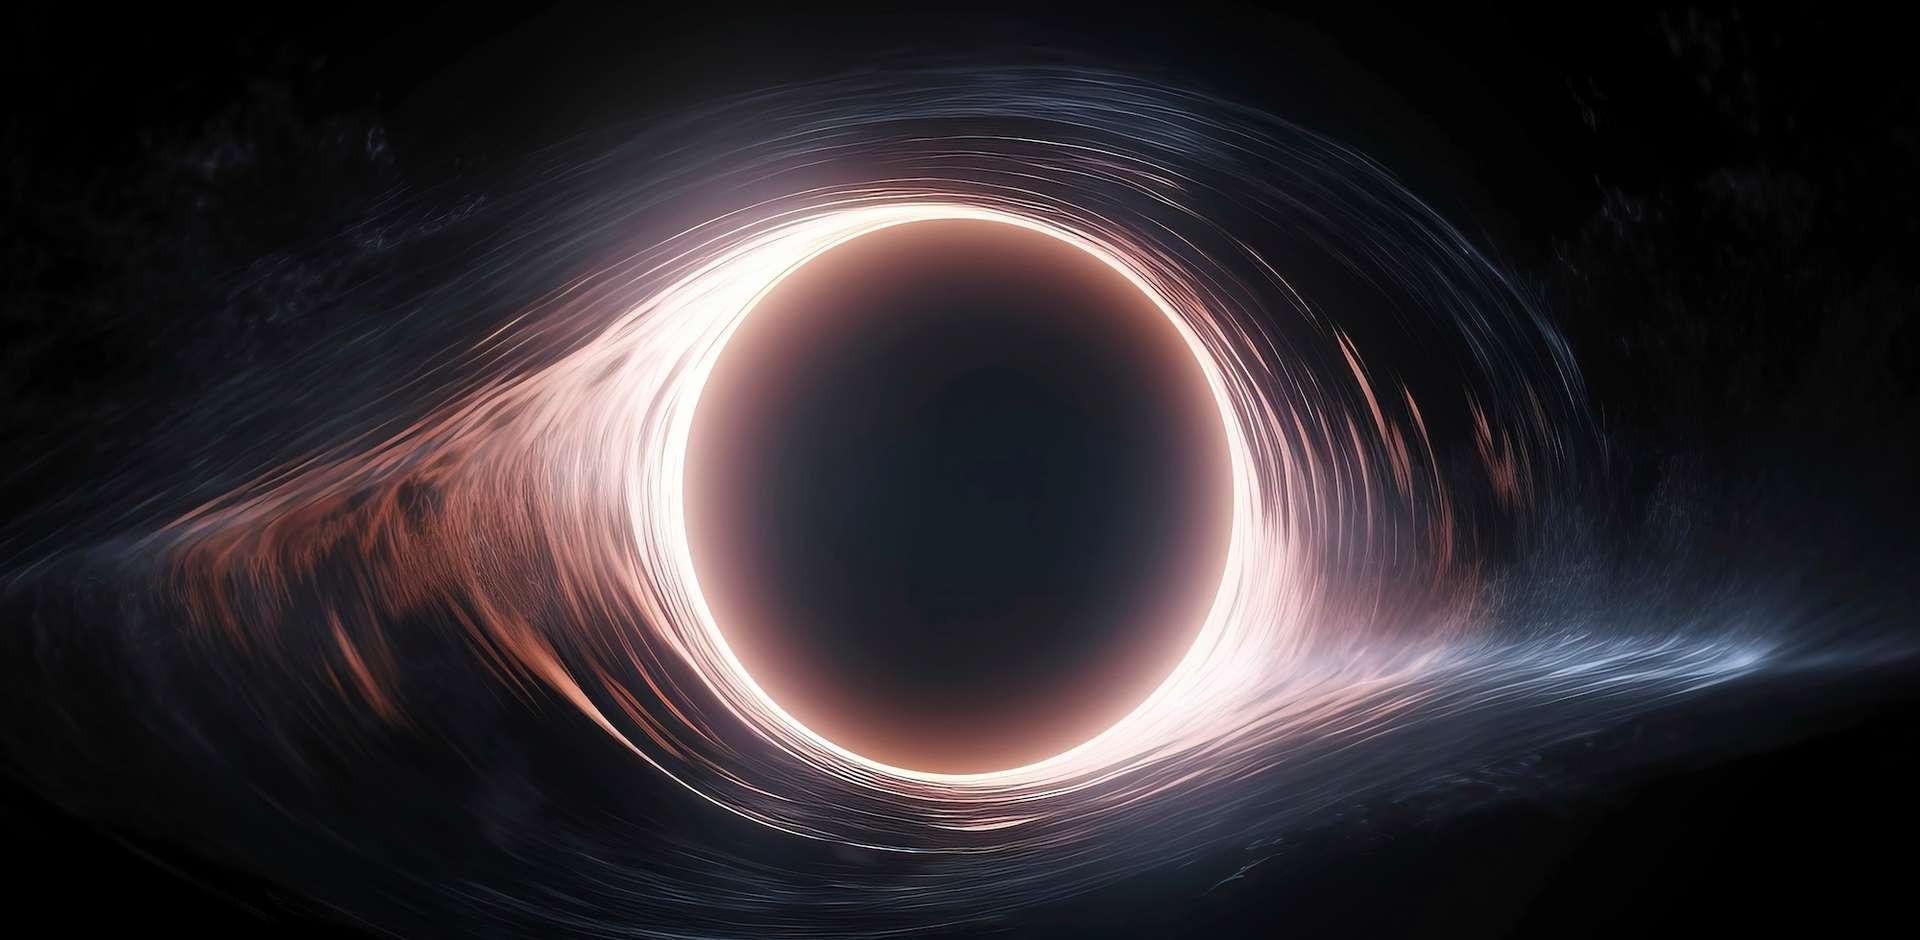 NASA releases an impressive video: a view of the universe from inside a huge black hole!